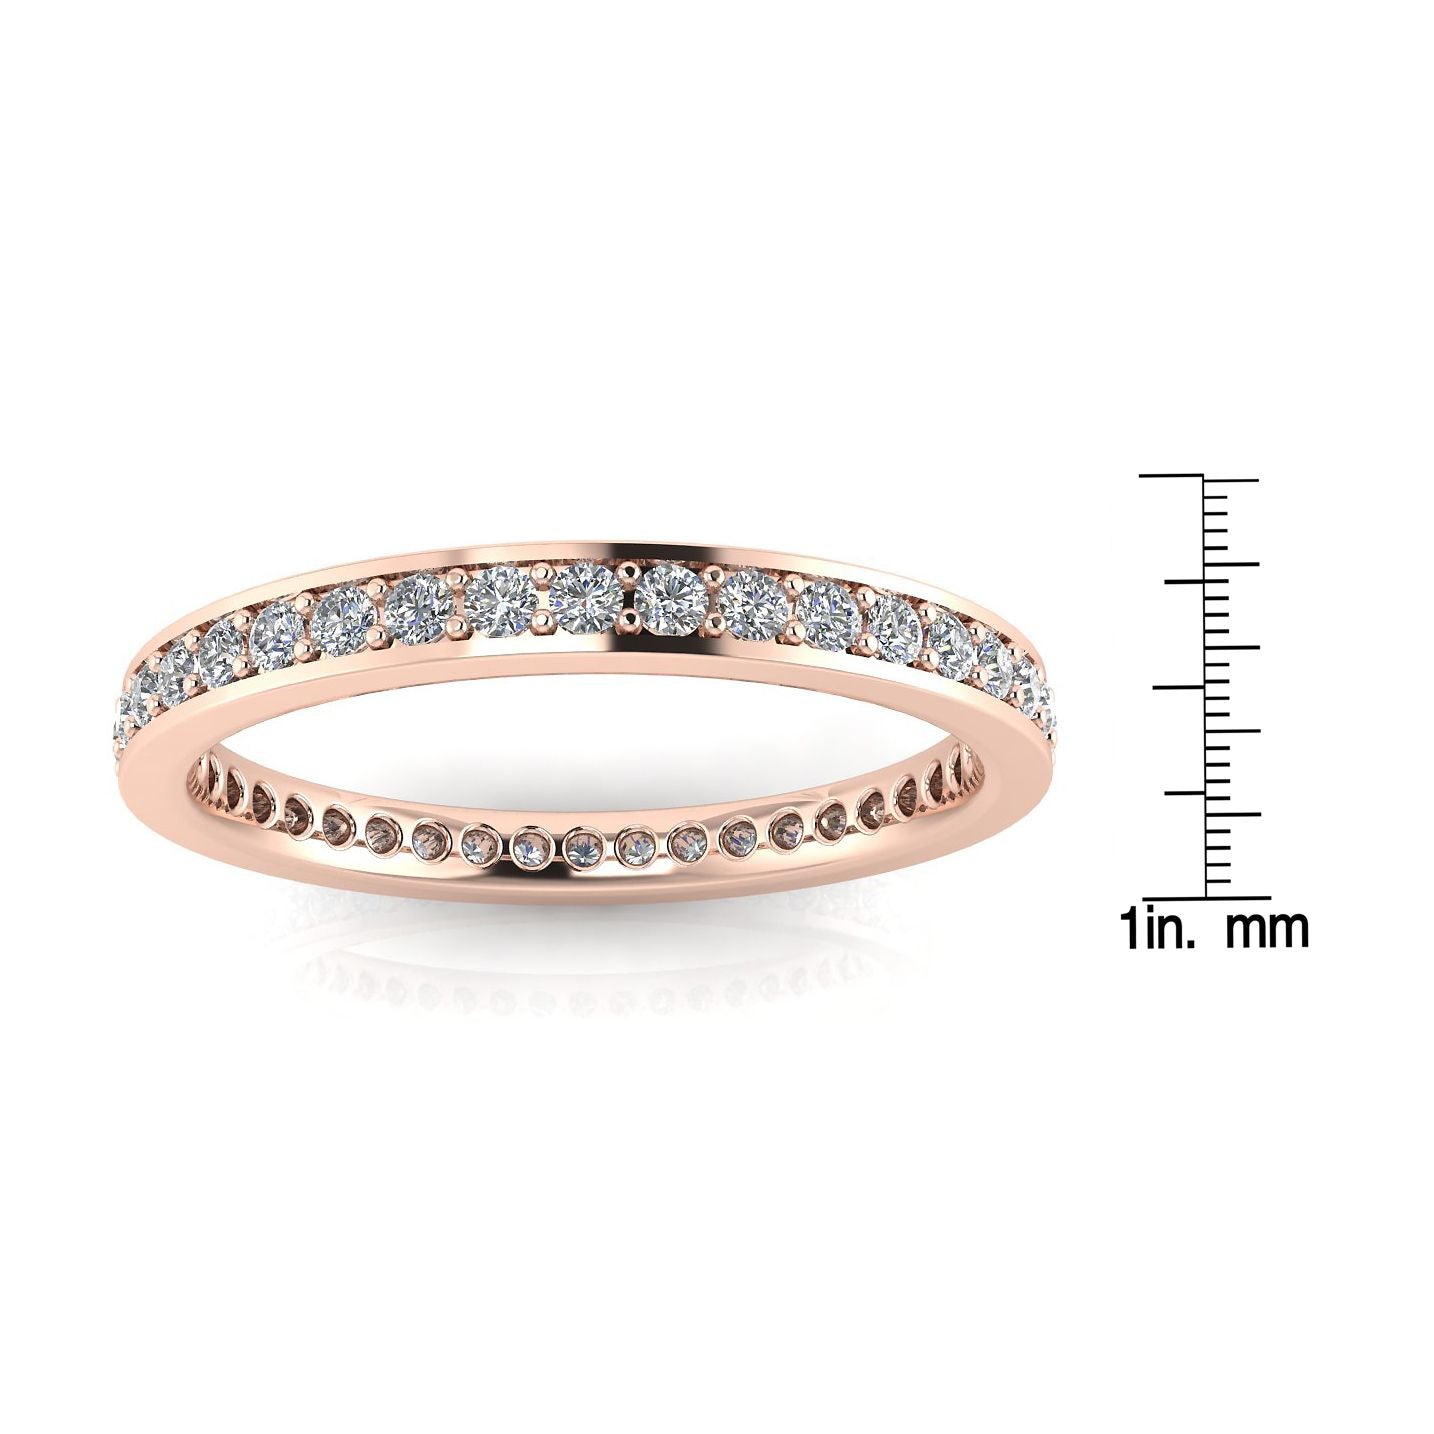 Round Brilliant Cut Diamond Channel Pave Set Eternity Ring In 14k Rose Gold  (1.02ct. Tw.) Ring Size 9